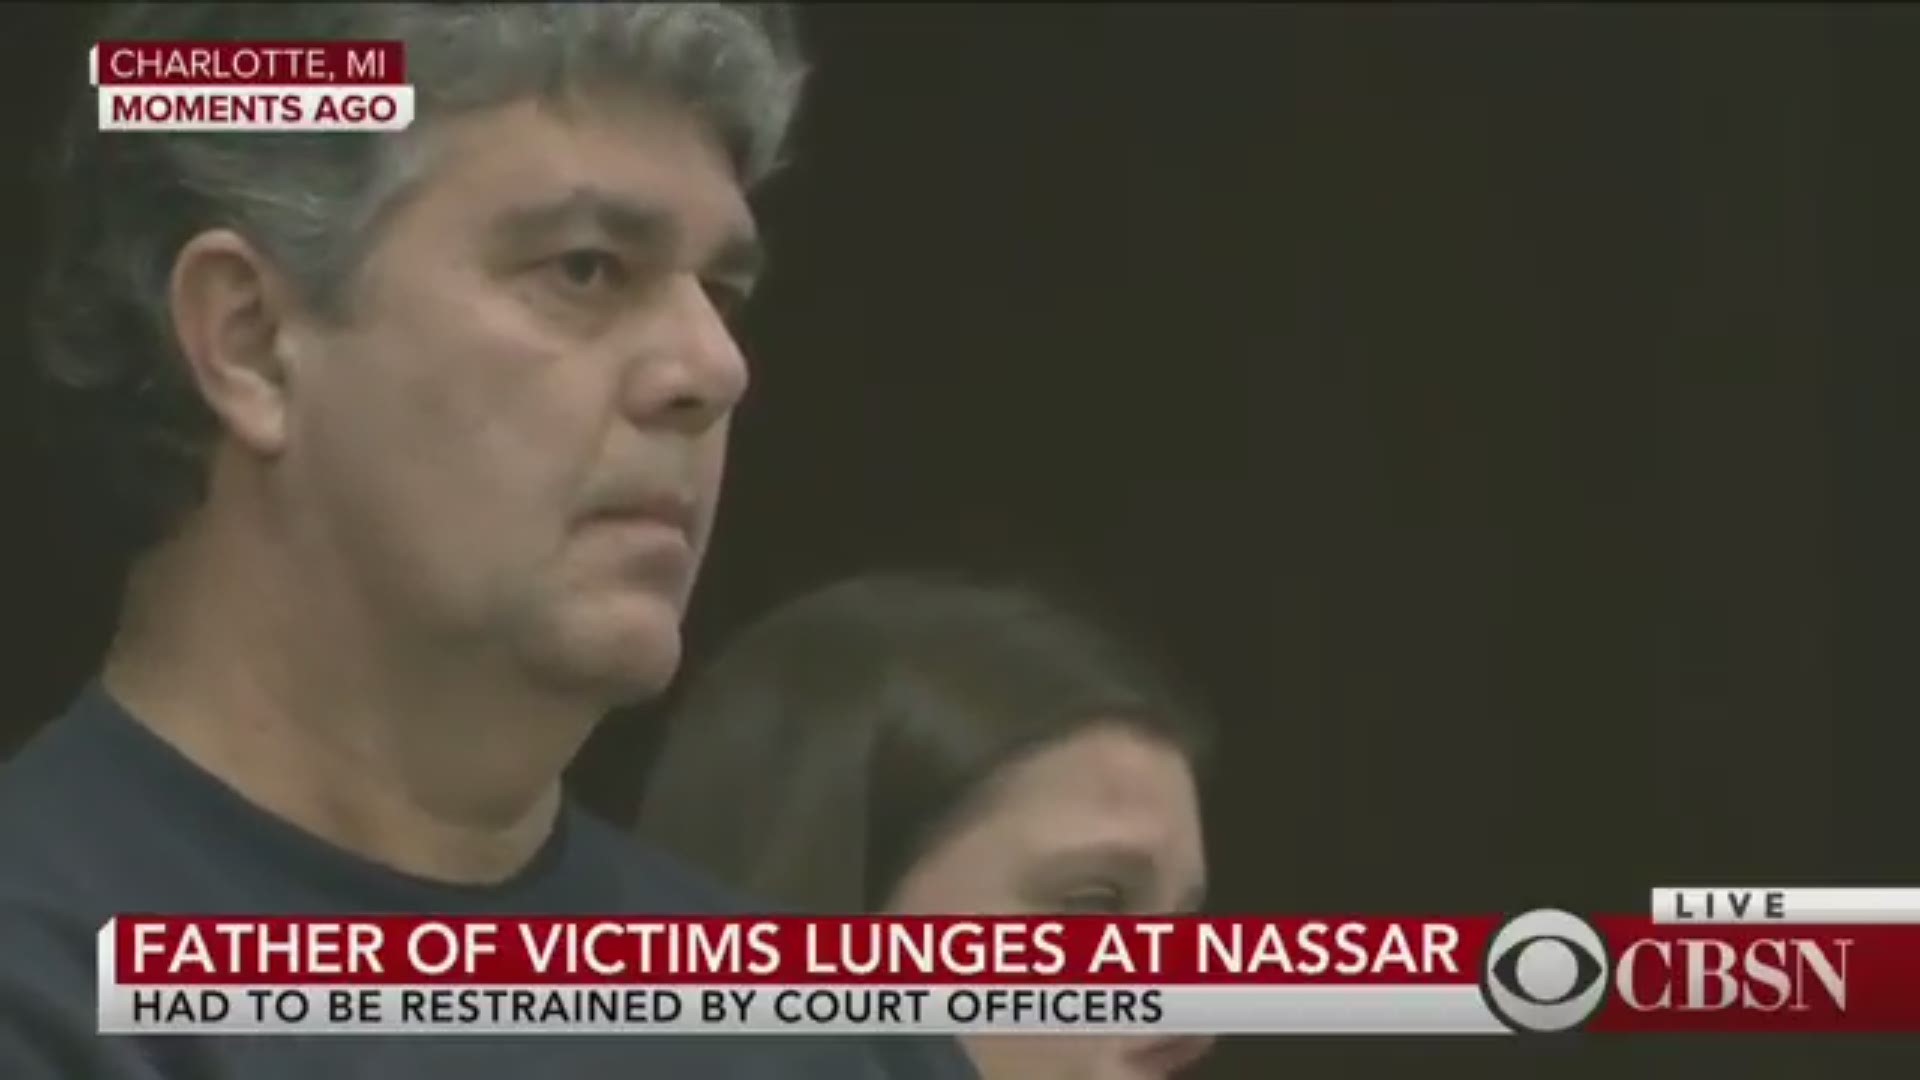 The father of victims of ex-USA Gymnastic doctor Larry Nassar lunges at Nassar in court after saying to judge, "I would ask you to as part of the sentencing to grant me 5 minutes in a locked room with this demon." ' CBS NEWS